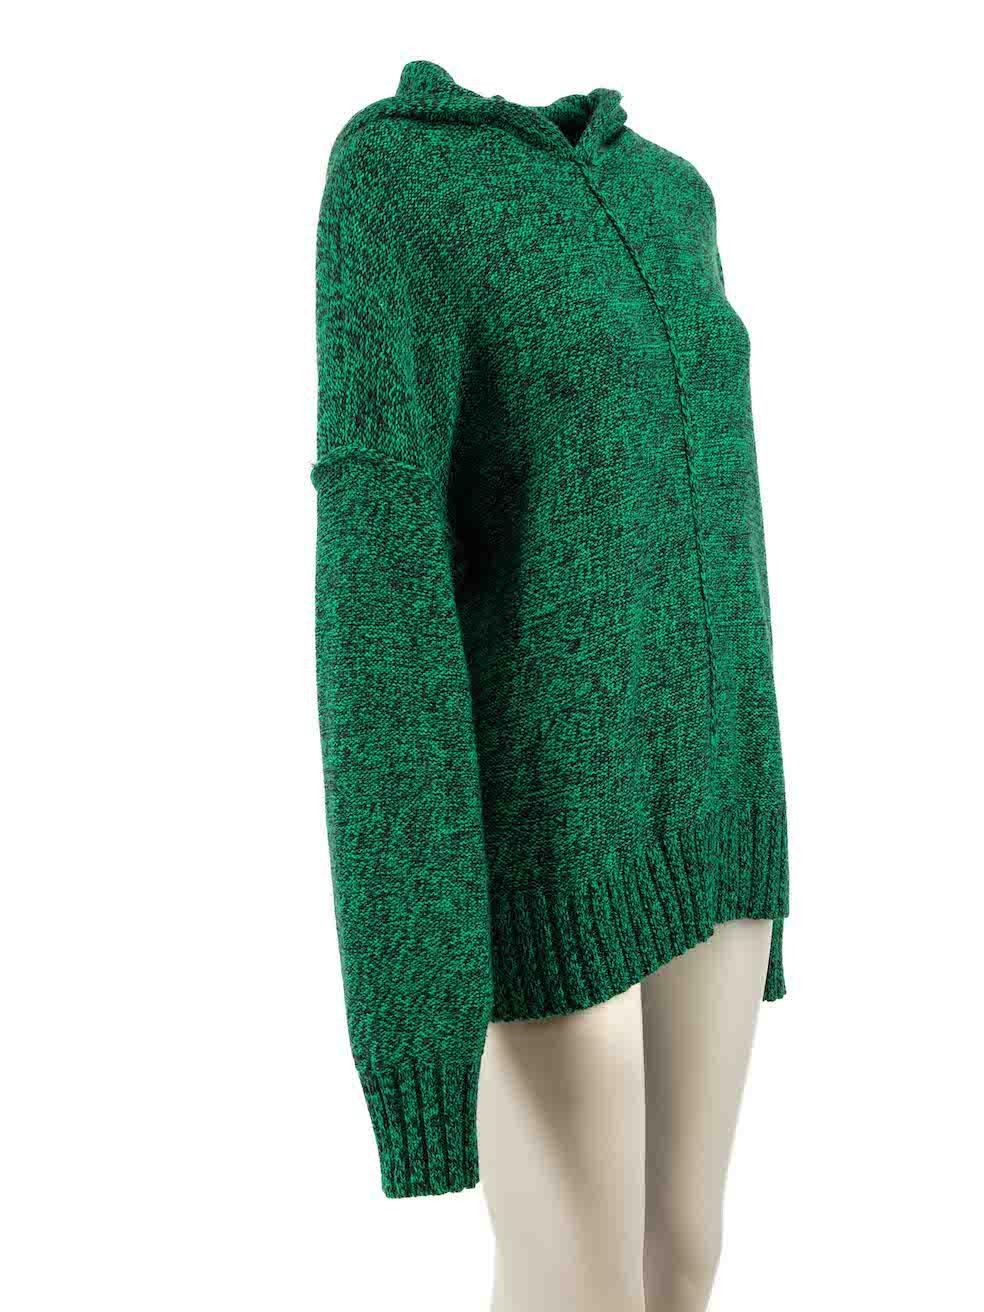 CONDITION is Good. Minor wear to knitwear is evident. Light wear to composition with a couple of small plucks and pulls to the knit found on this used T by Alexander Wang designer resale item.

Details
Green
Synthetic
Long sleeves jumper
Marl